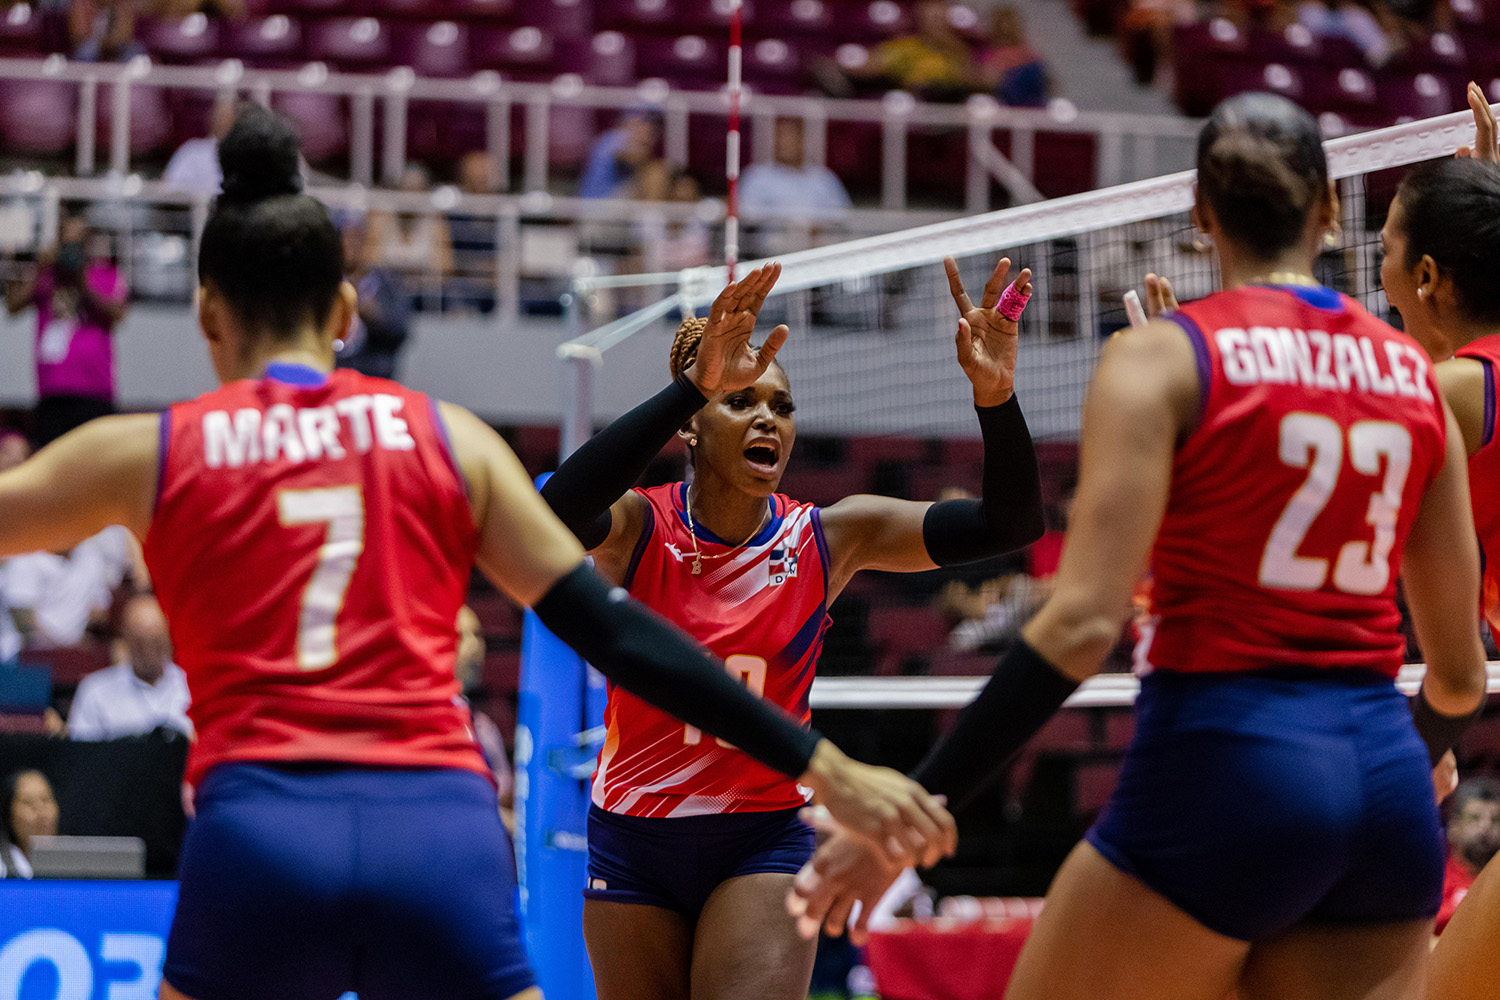 Dominican Republic starts their title defense with a victory against Chile